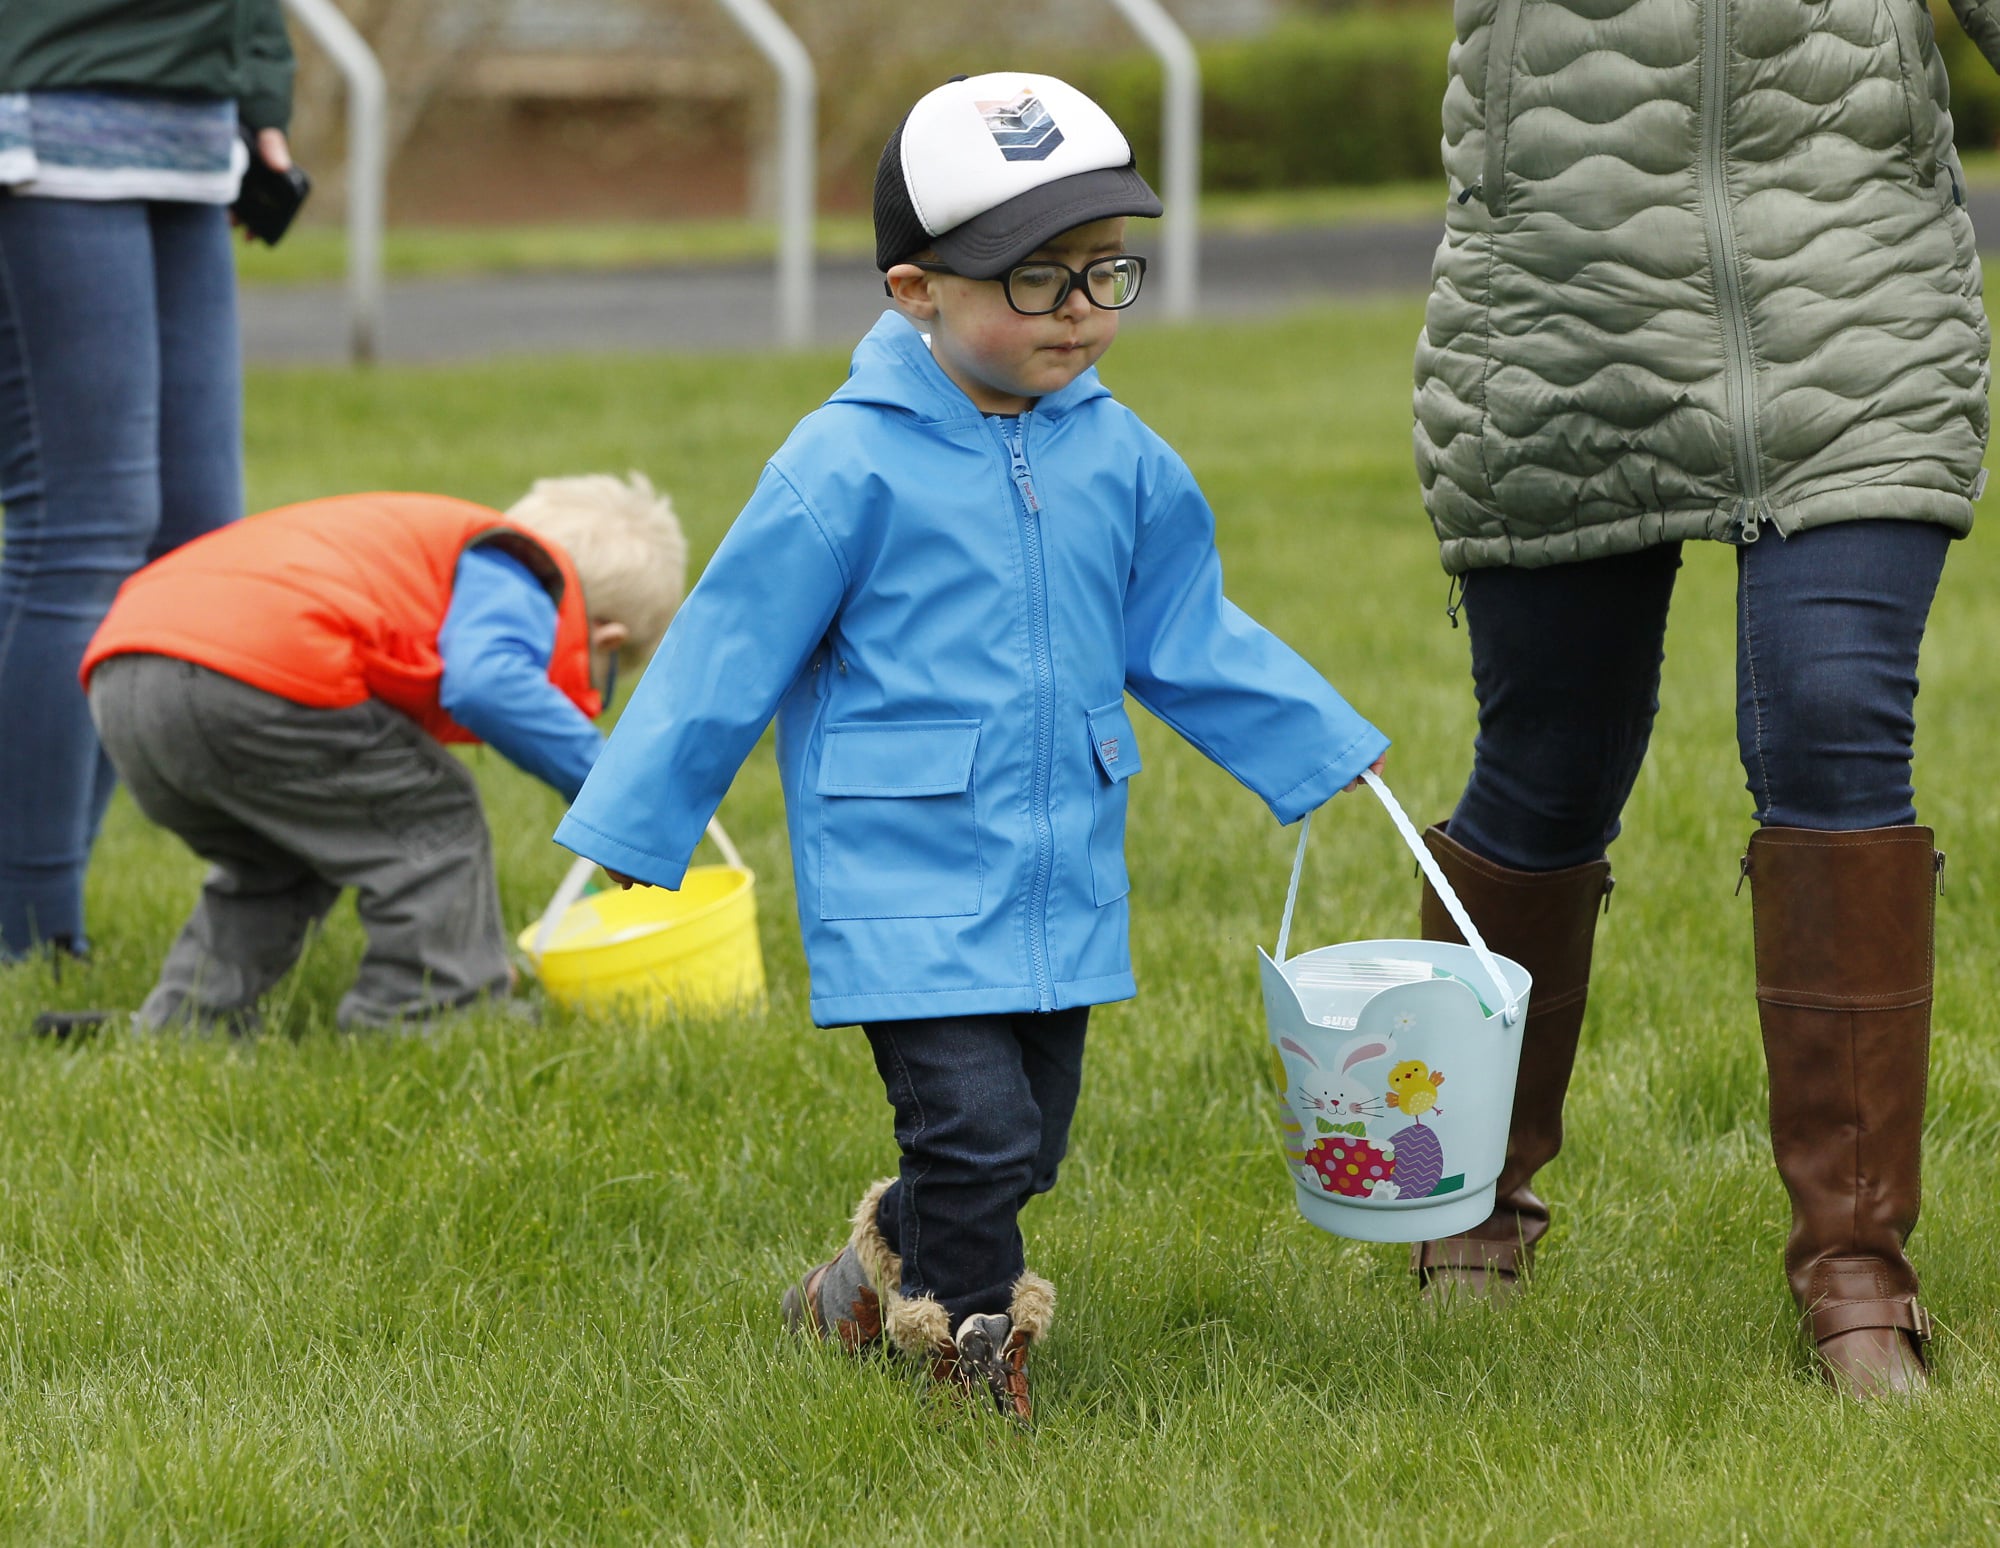 Beeping Easter egg hunt photo gallery